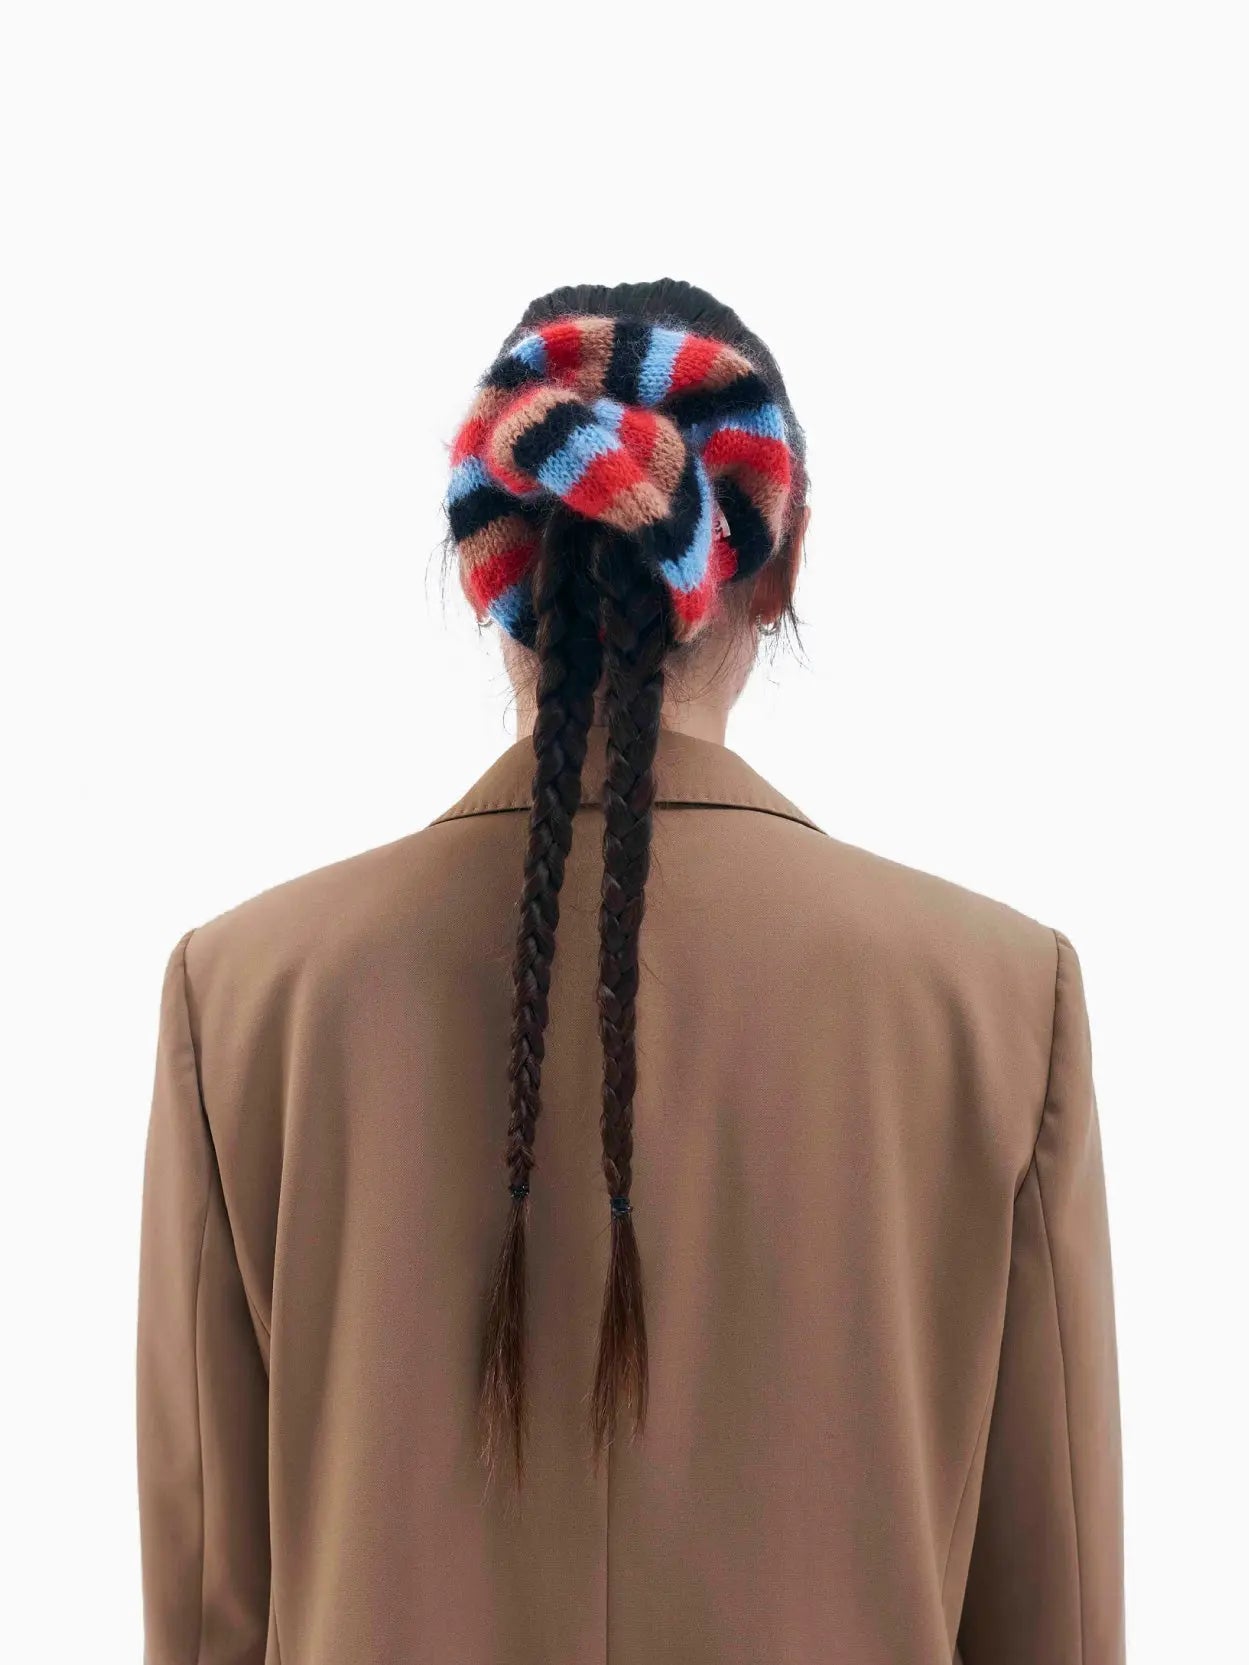 A round, striped wool or knitted hair scrunchie with alternating red, blue, black, and tan colors. The Serena Scrunchie has a small brand tag from Tomasa attached to it. Photographed against a plain white background, it's a vibrant accessory that captures the essence of Barcelona style.